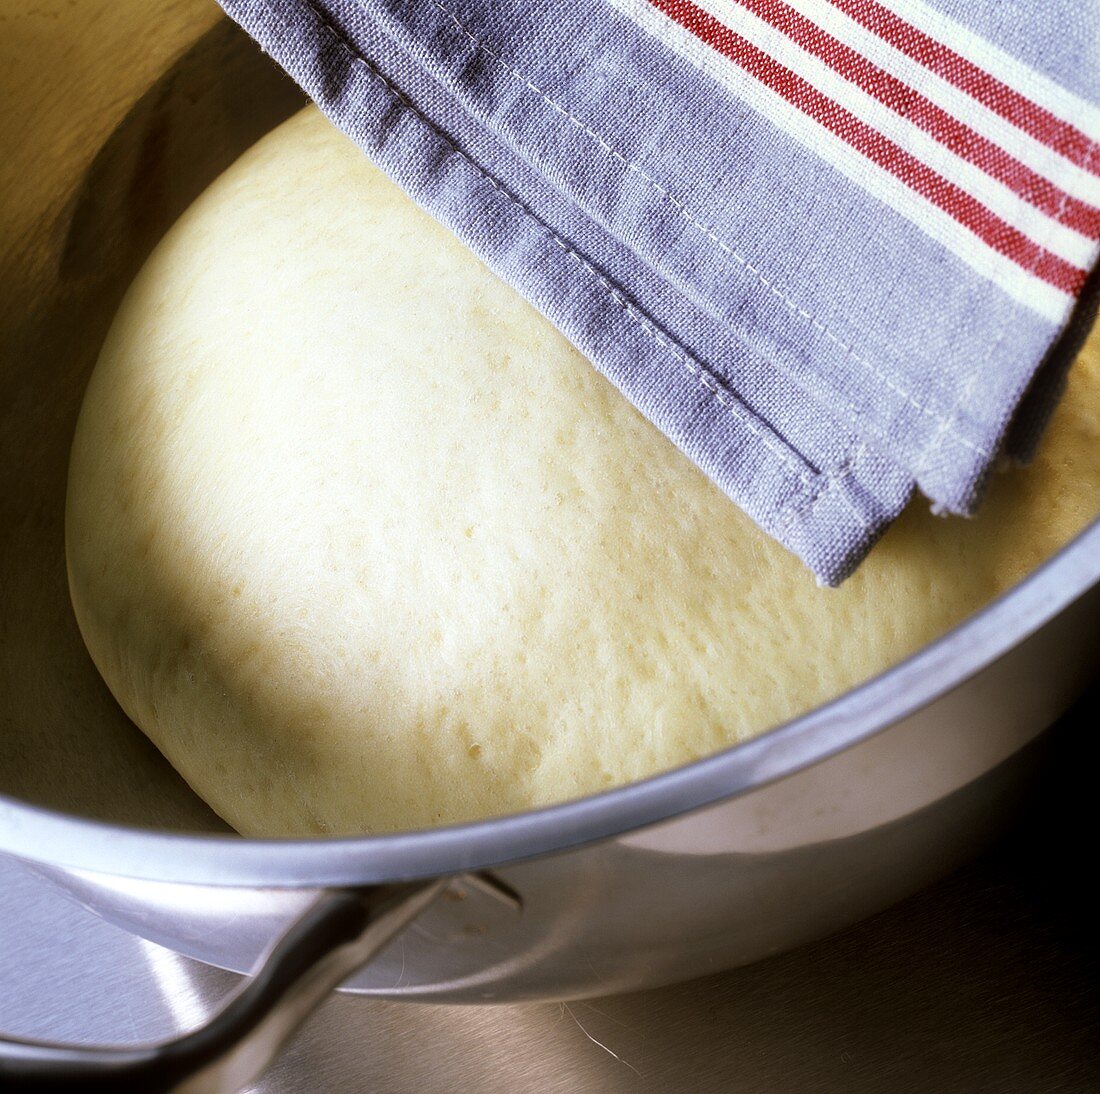 Leavened dough in a bowl with a cloth over it